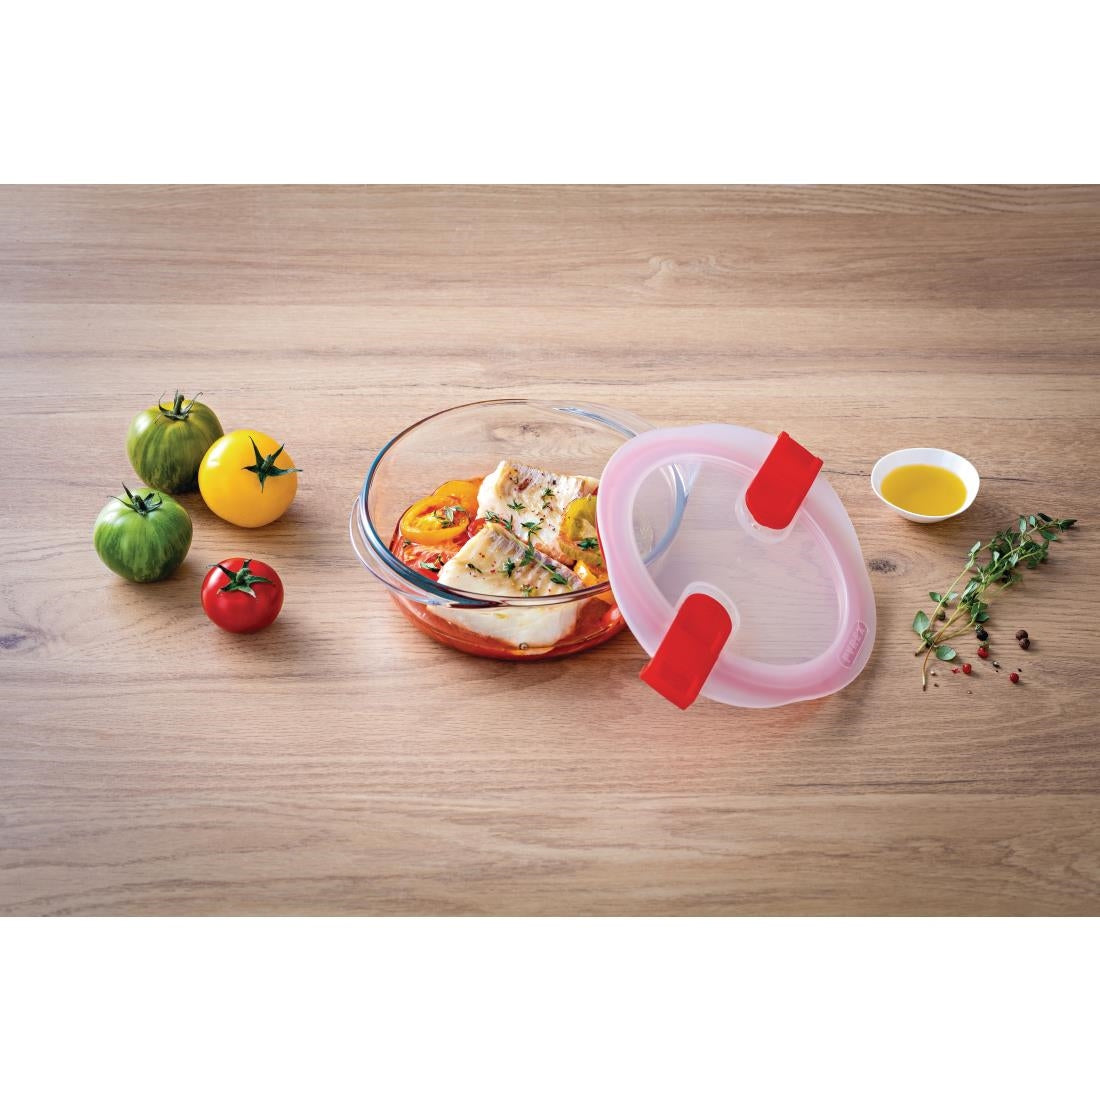 FC360 Pyrex Cook and Heat Round Dish with Lid 350ml JD Catering Equipment Solutions Ltd